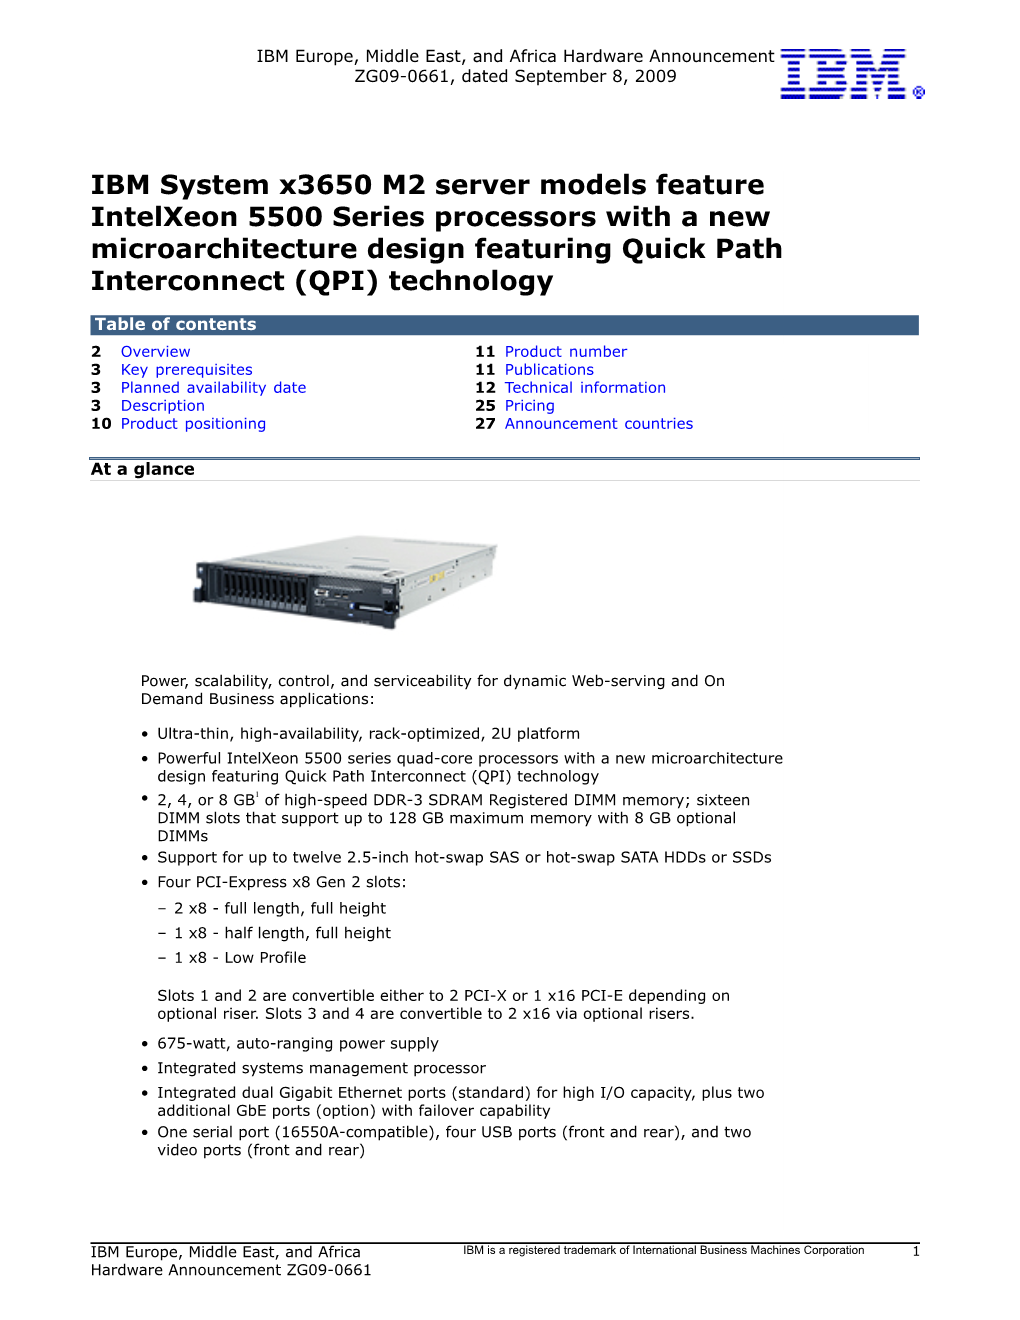 IBM System X3650 M2 Server Models Feature Intelxeon 5500 Series Processors with a New Microarchitecture Design Featuring Quick Path Interconnect (QPI) Technology